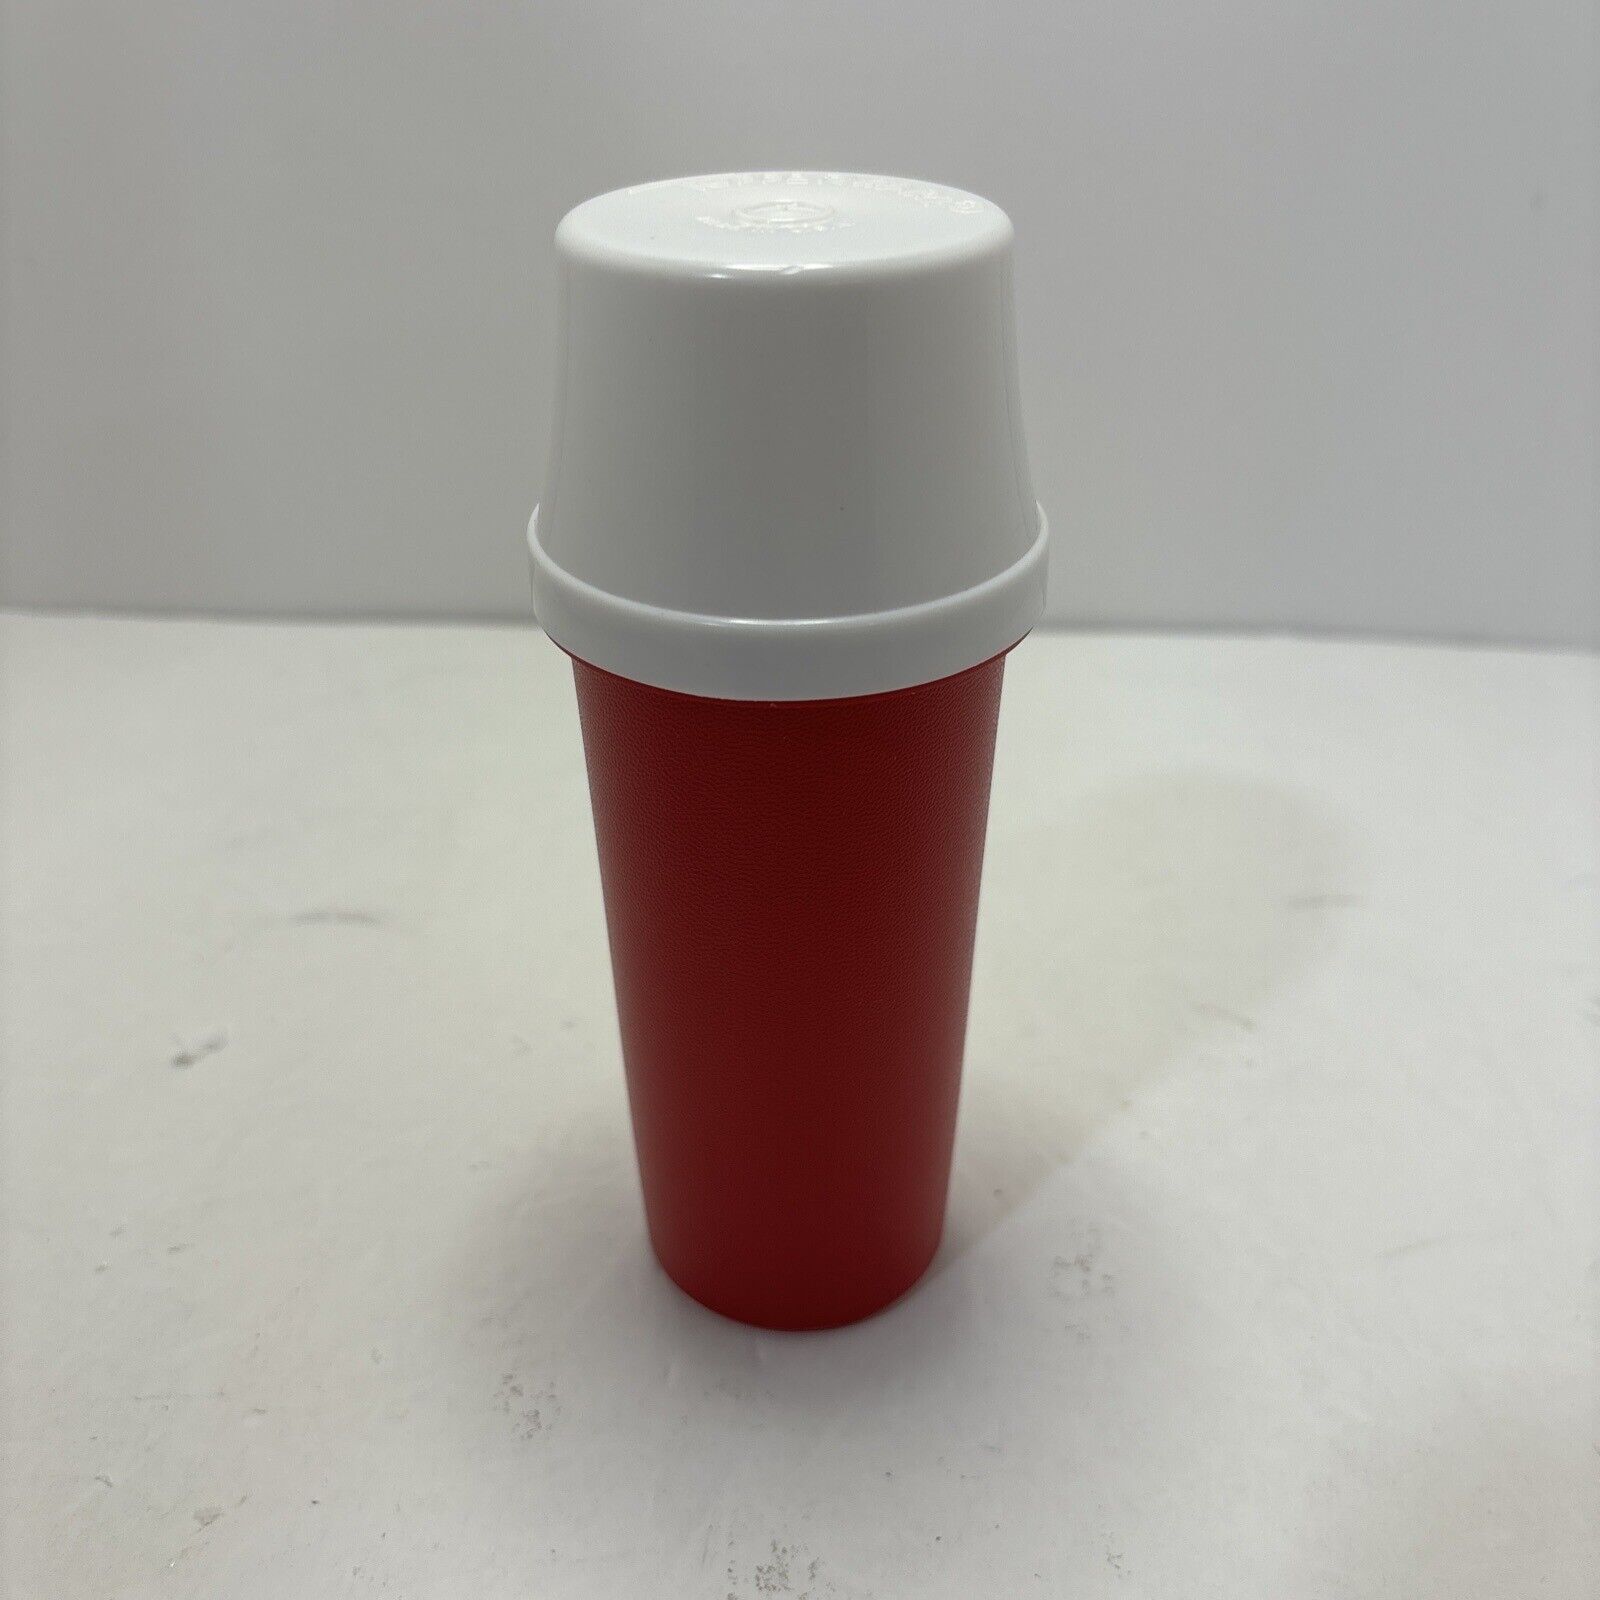 Vintage Tupperware Ketchup Container & Dispenser, #1329-15